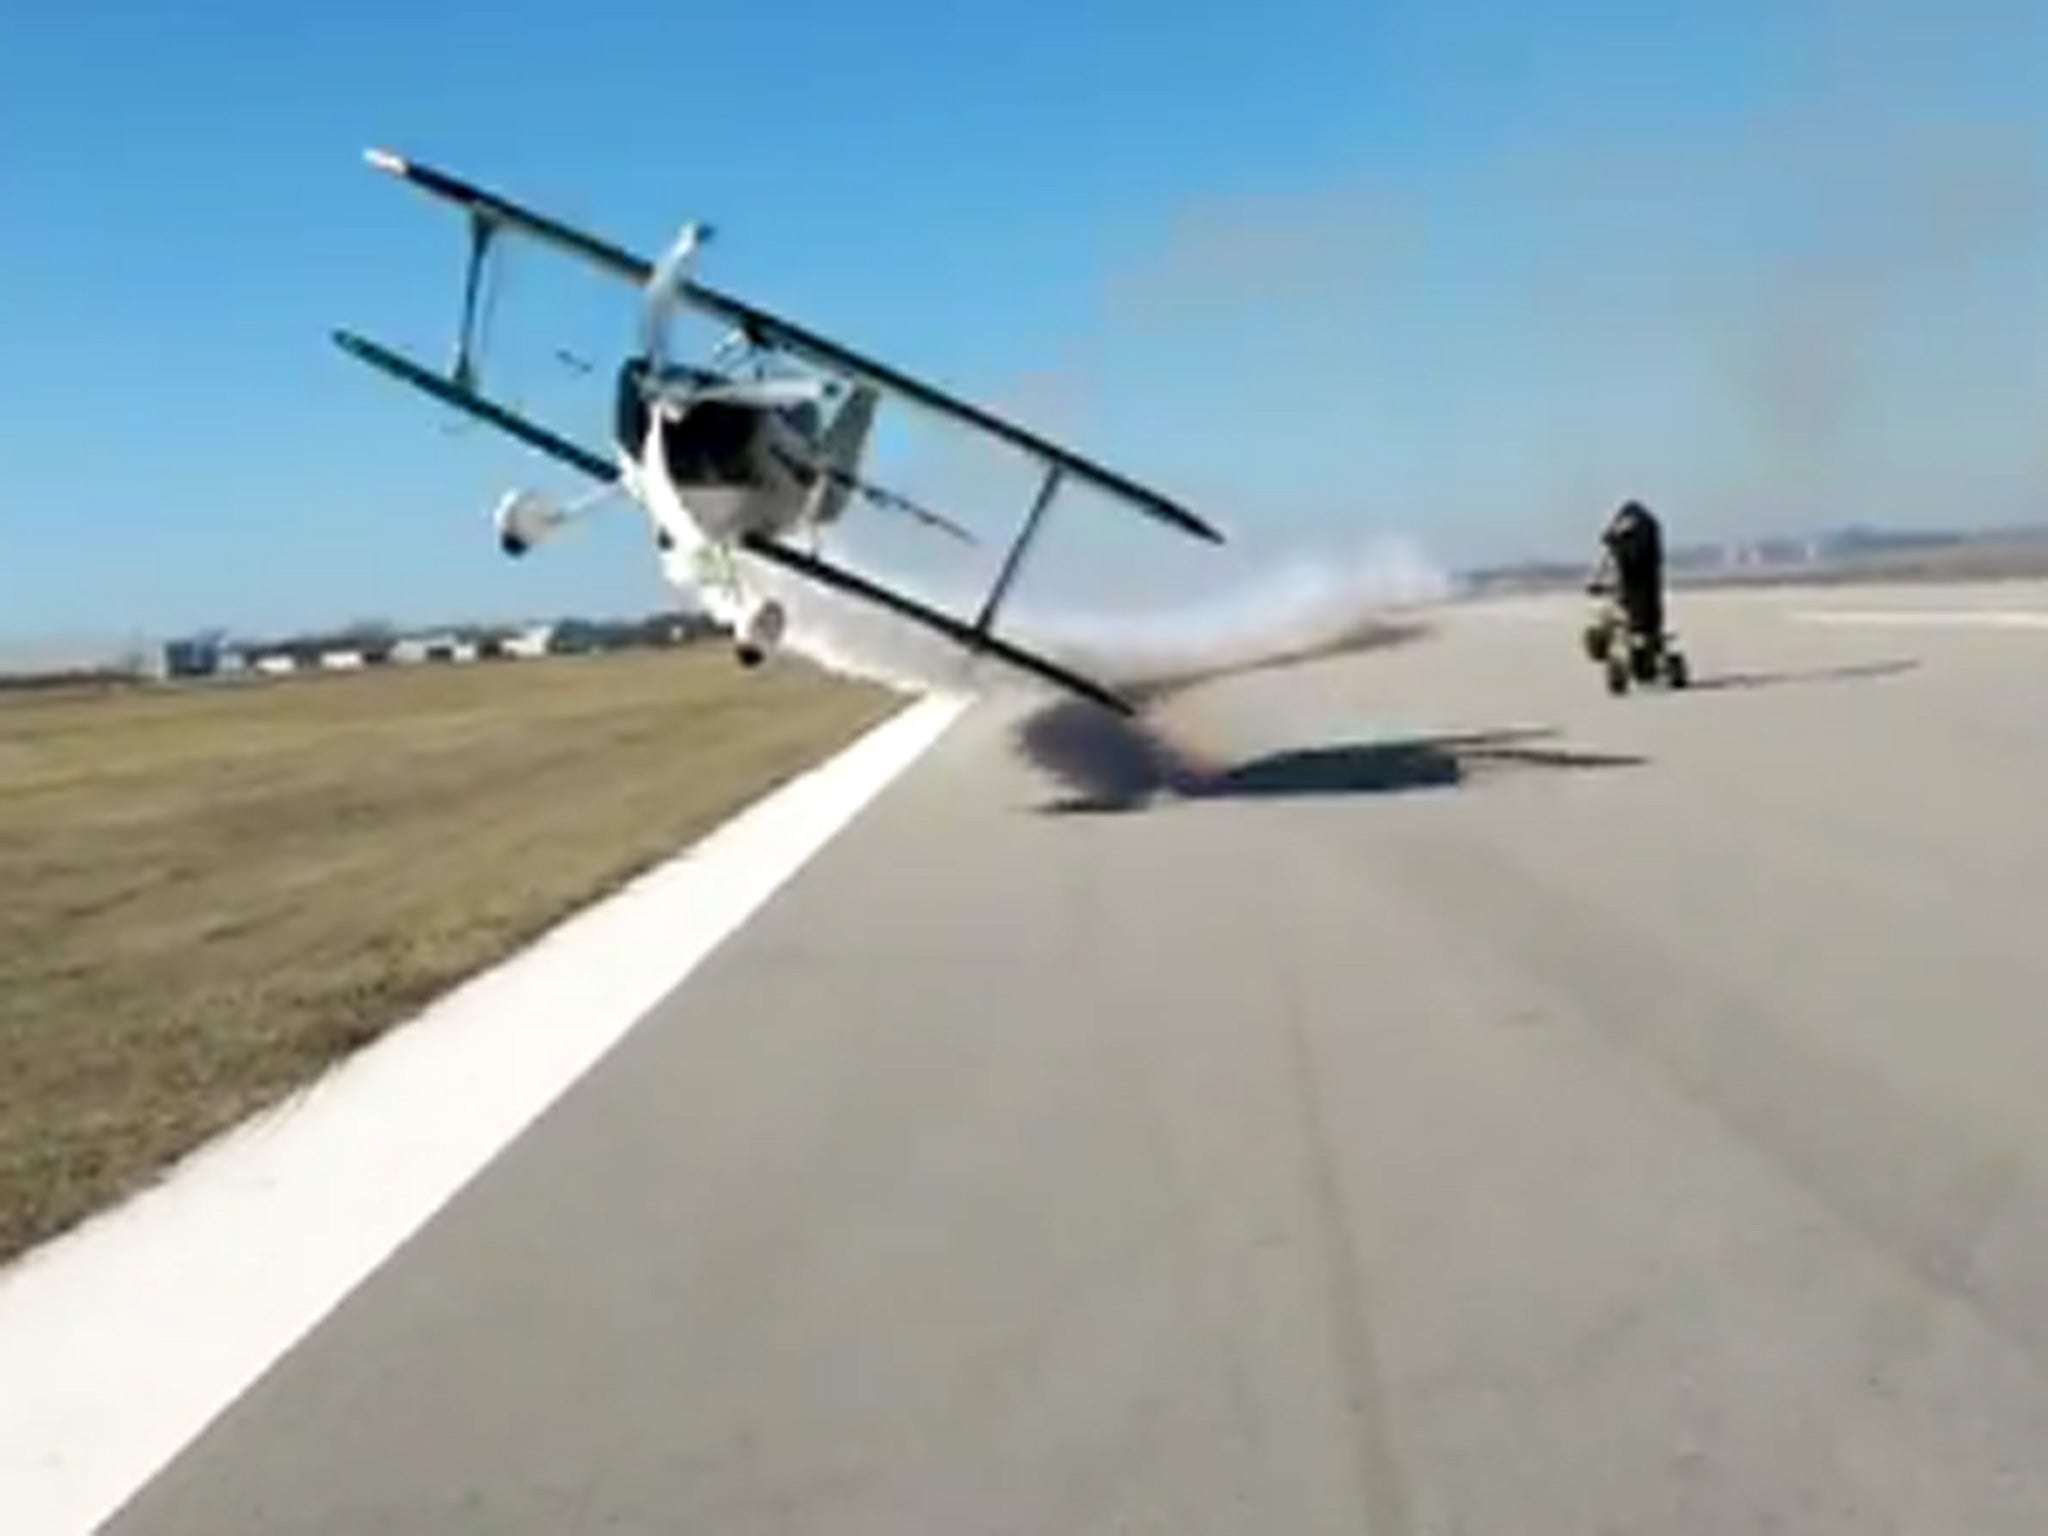 The moment the plane flies perilously close